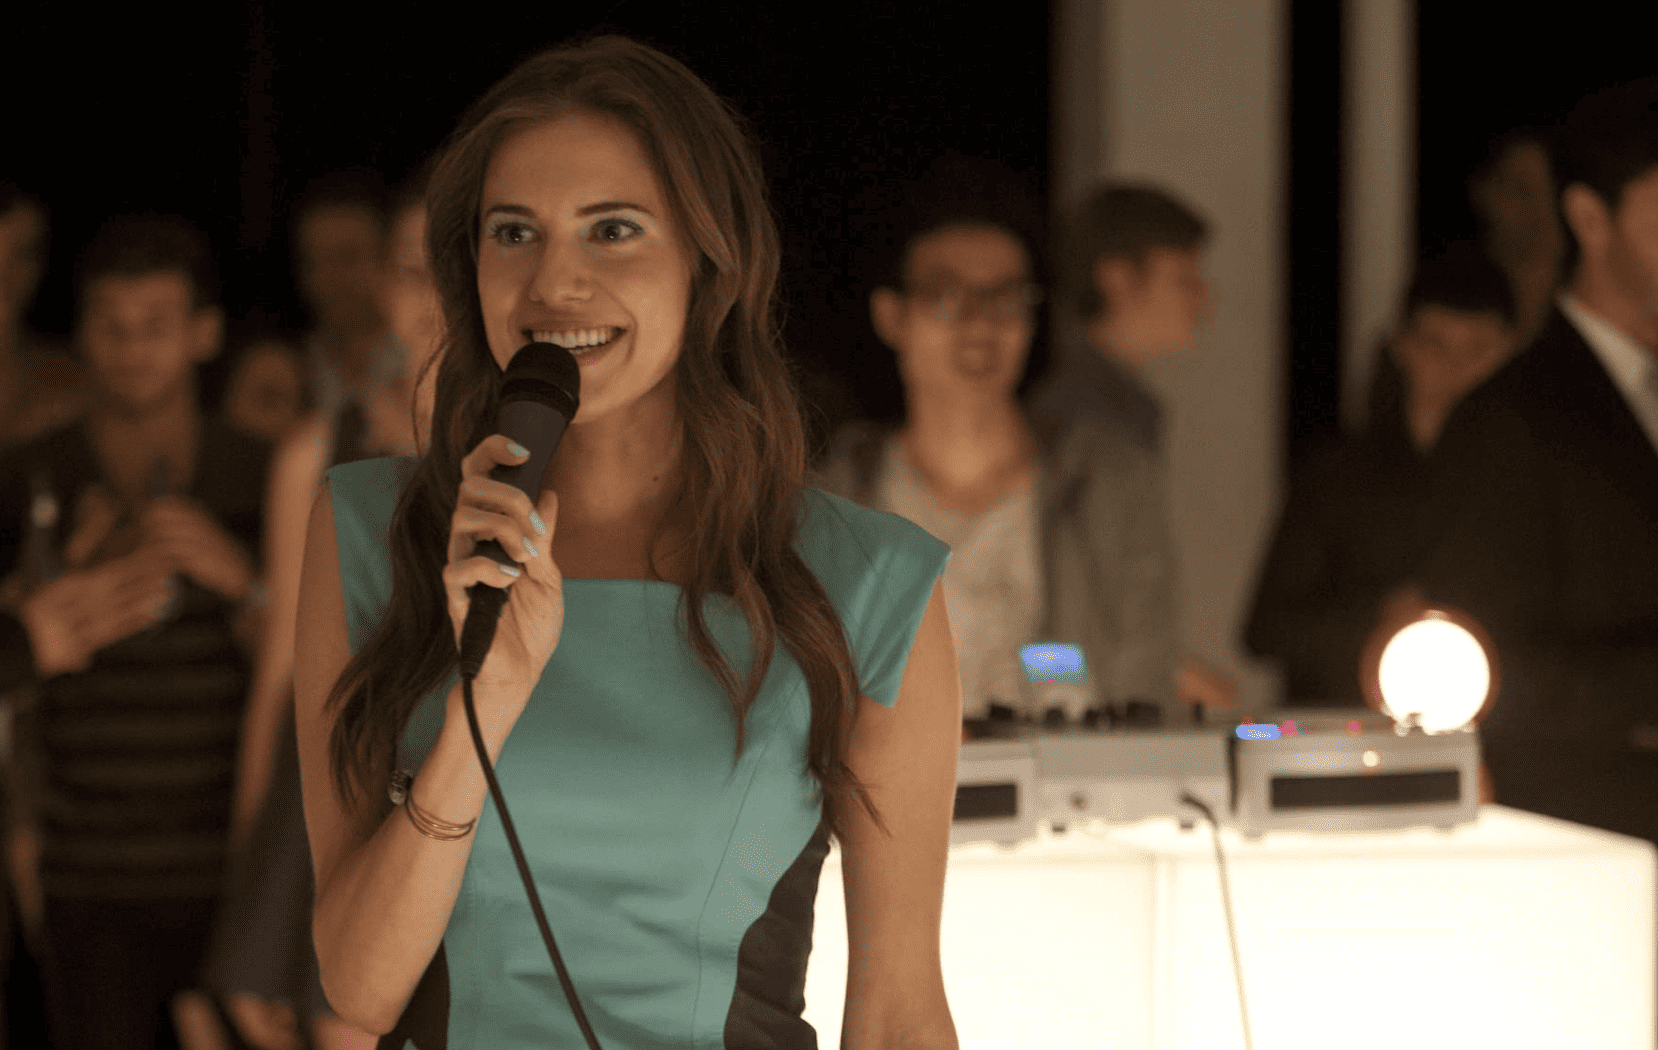 Marnie standing in the middle of a dance floor and holding a microphone in this image from Apatow Productions